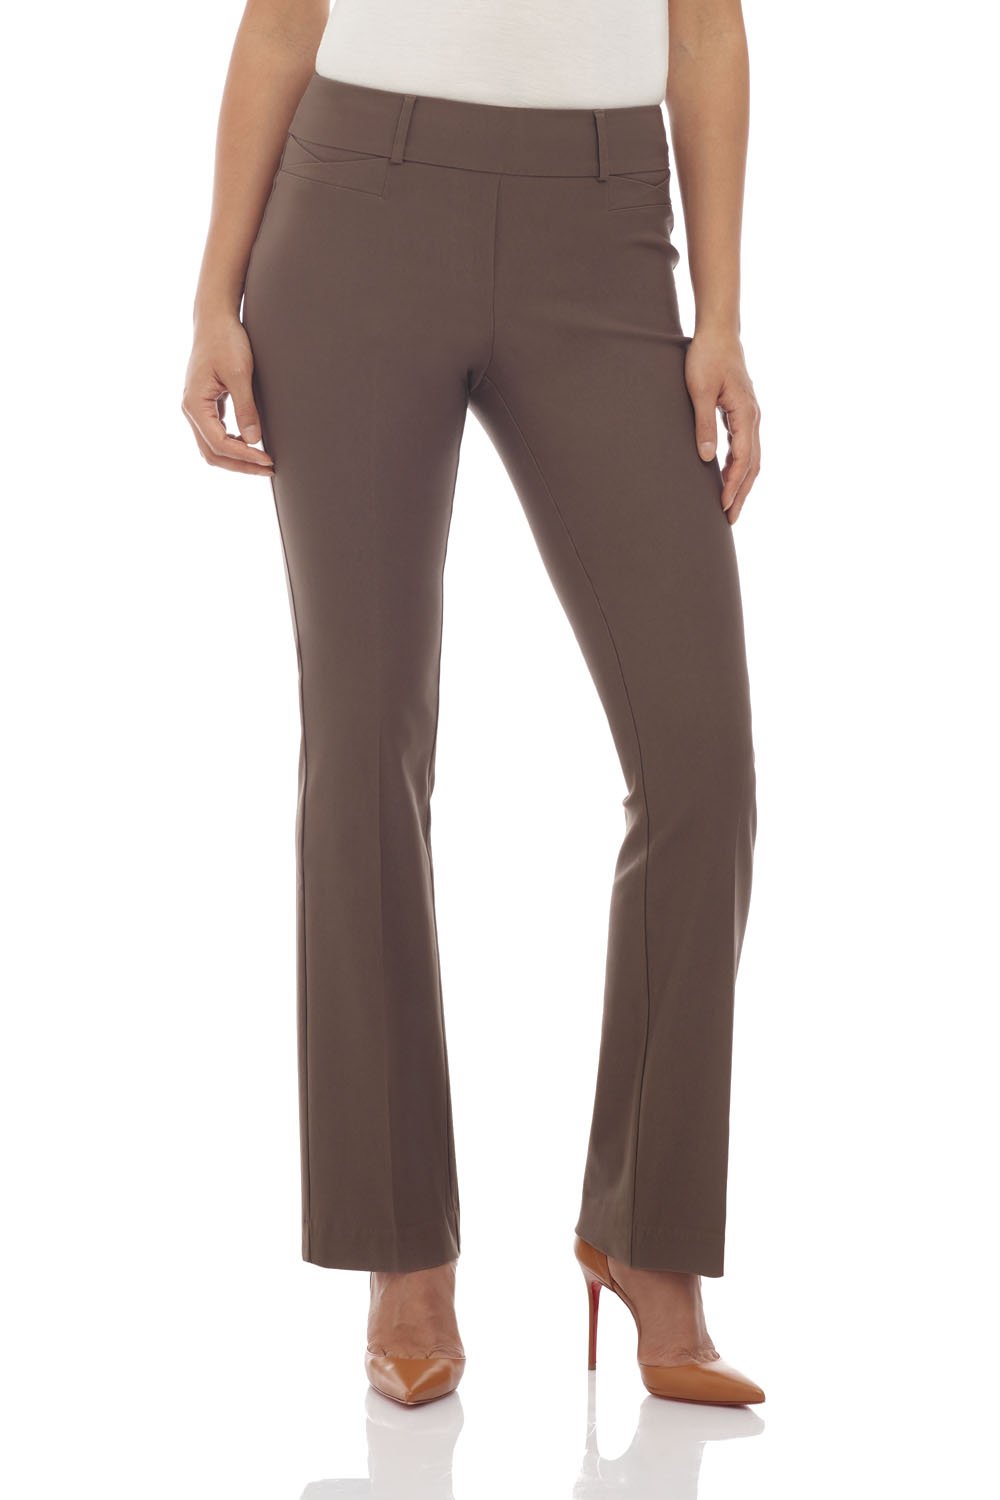 Rekucci Womens Ease in to comfort Fit Barely Bootcut Stretch Pants (4,  Mocha)